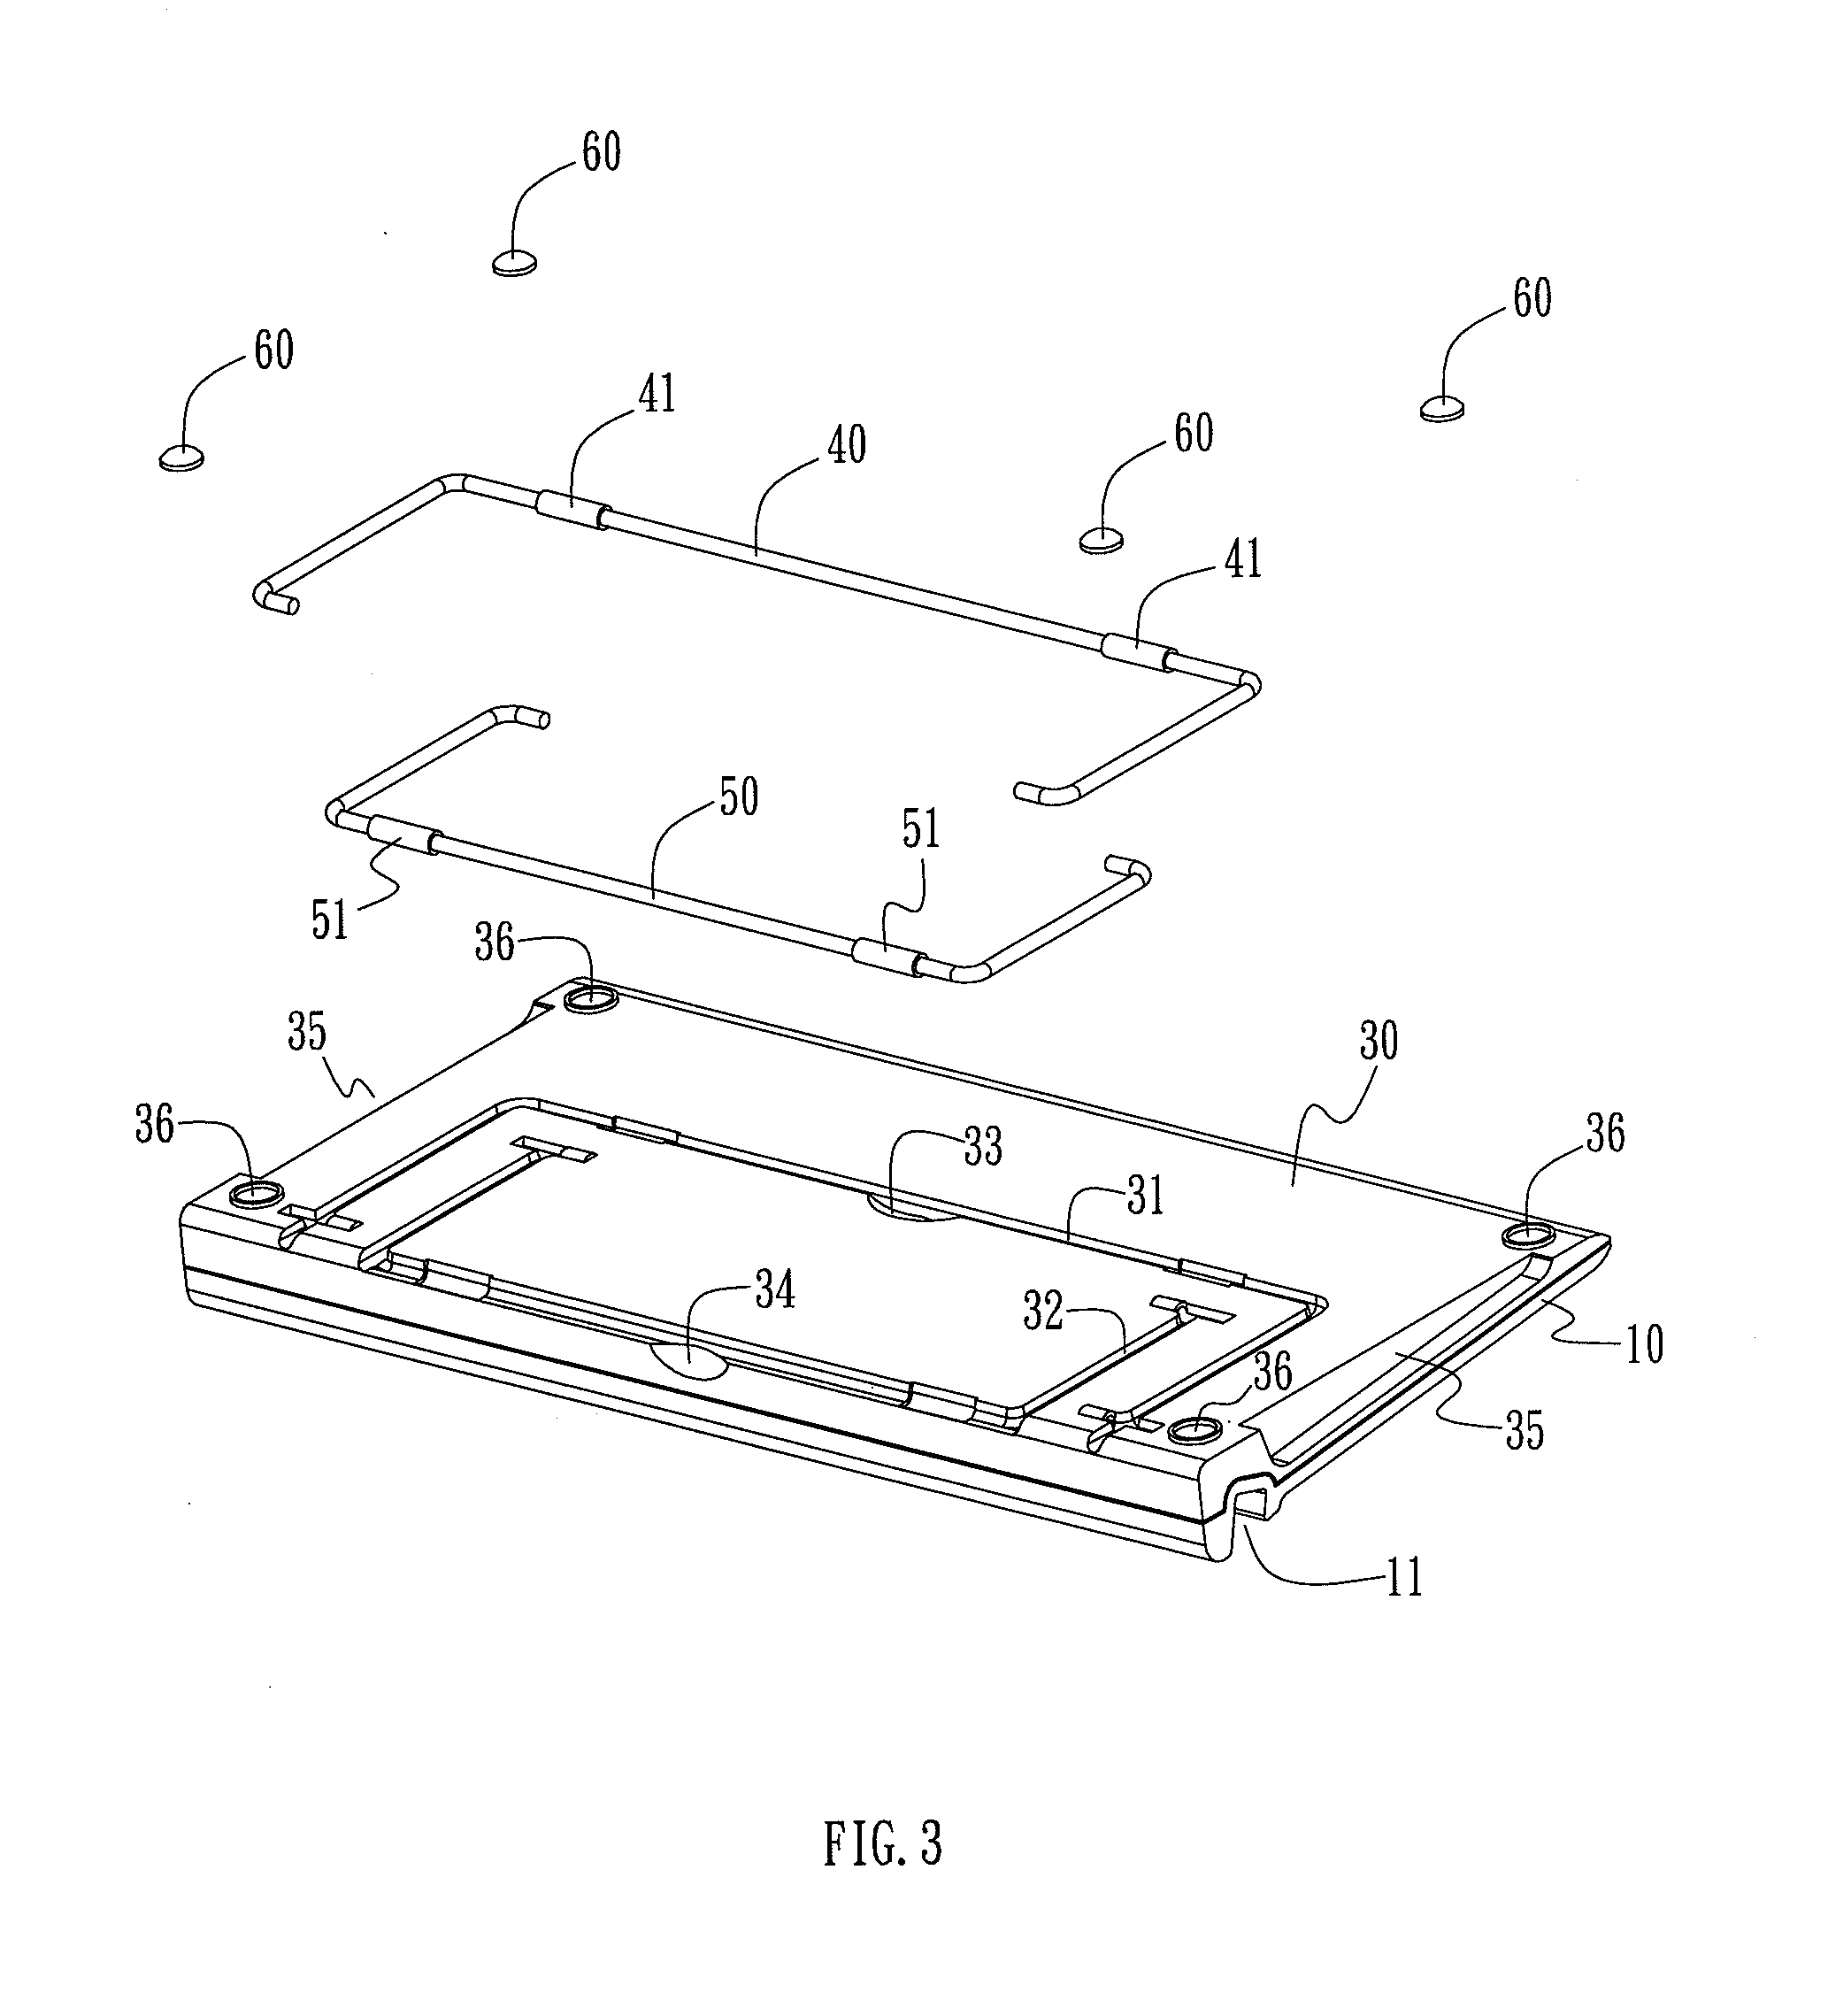 Keyboard device capable of supporting a tablet personal computer